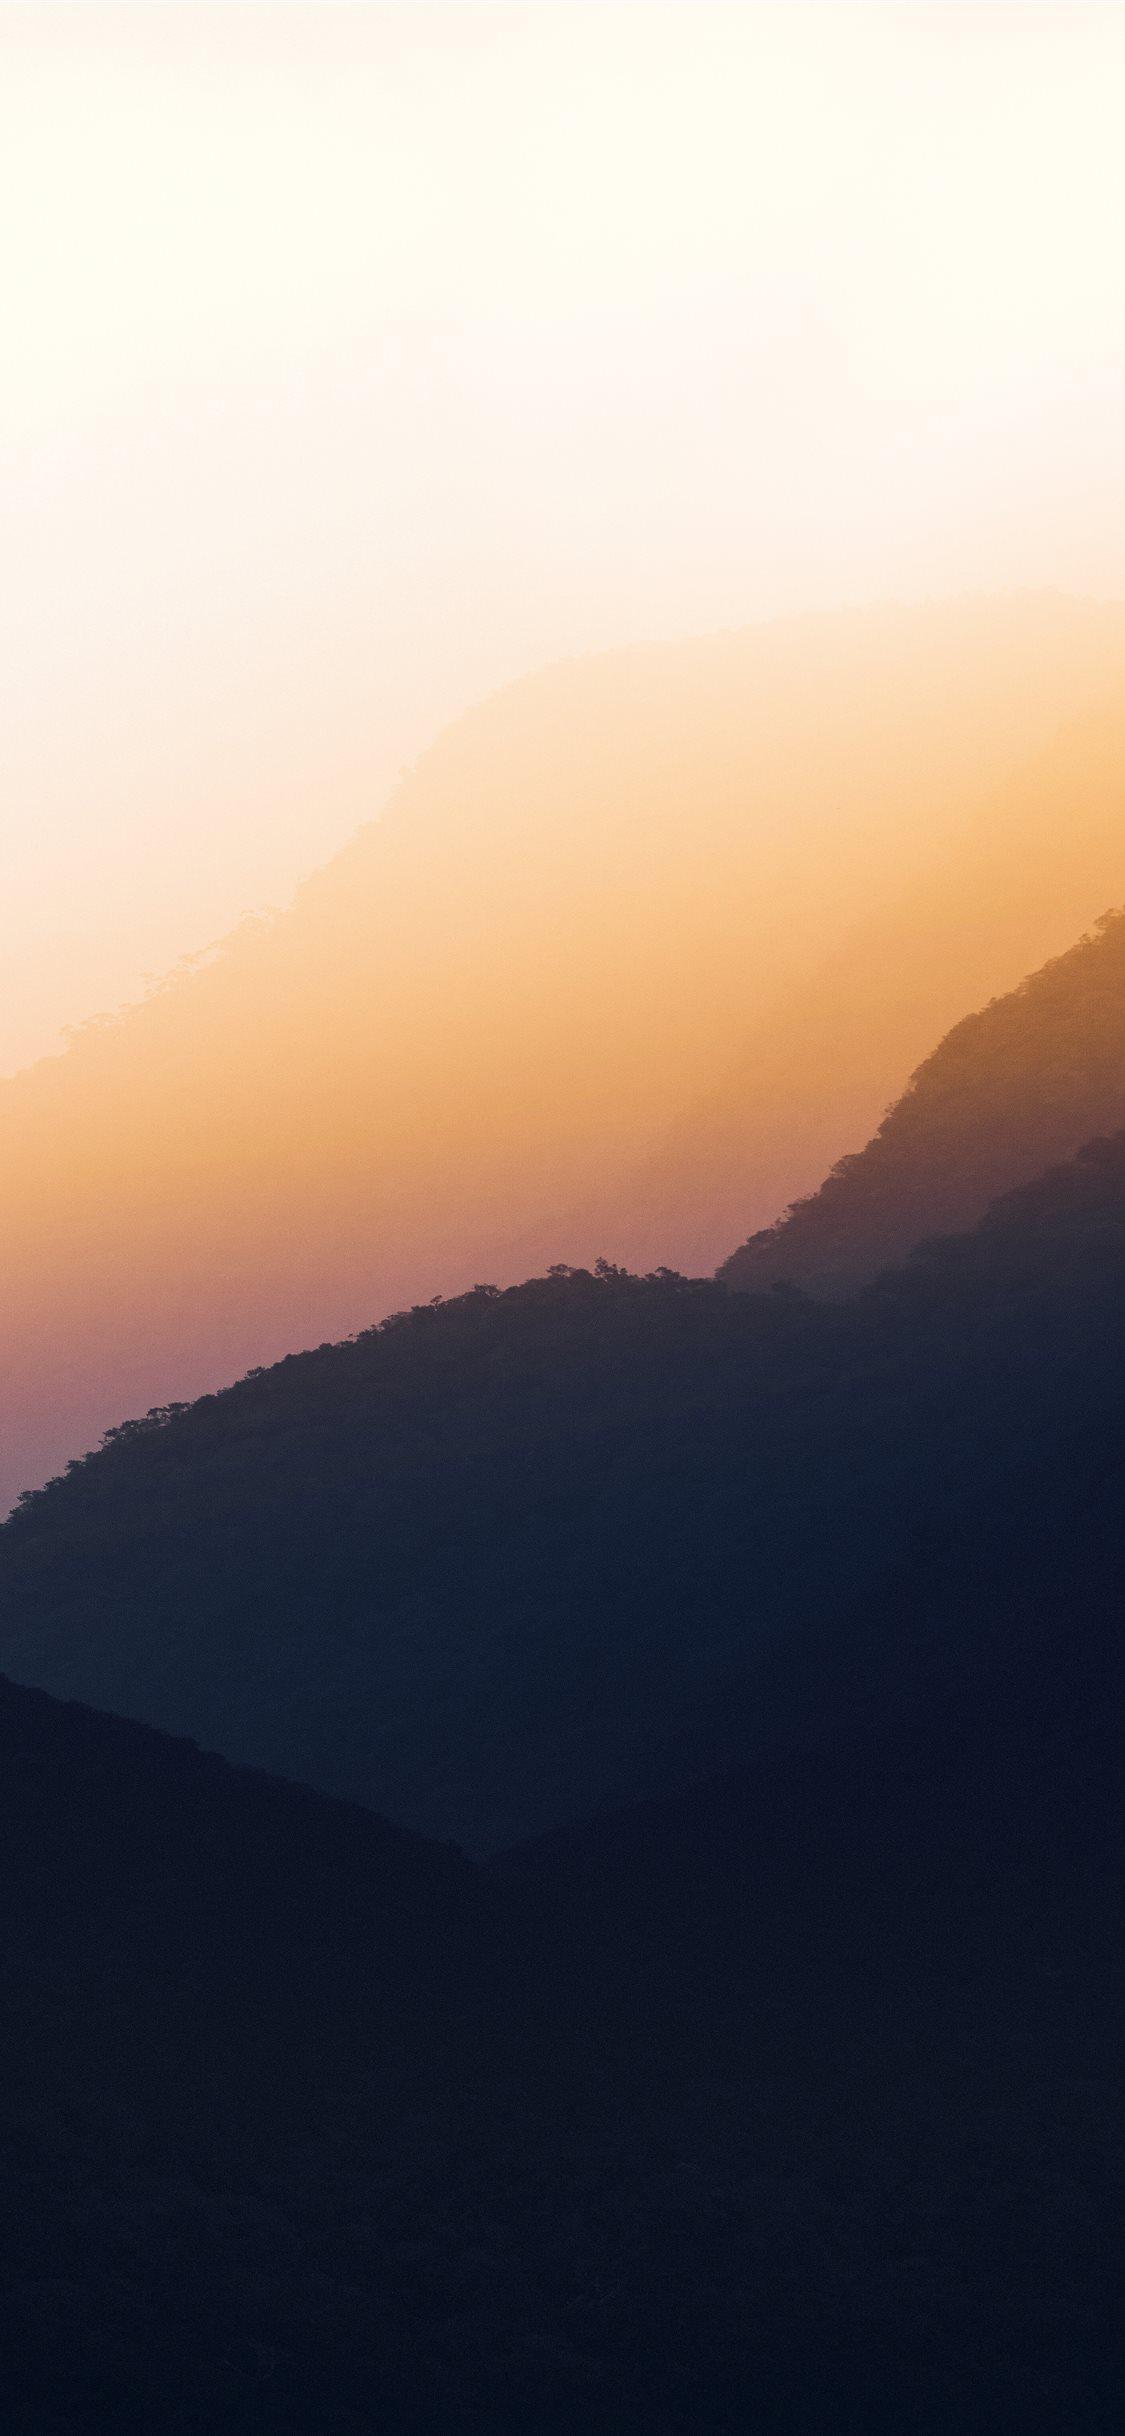 sunrise view on mountain iPhone X Wallpaper Free Download